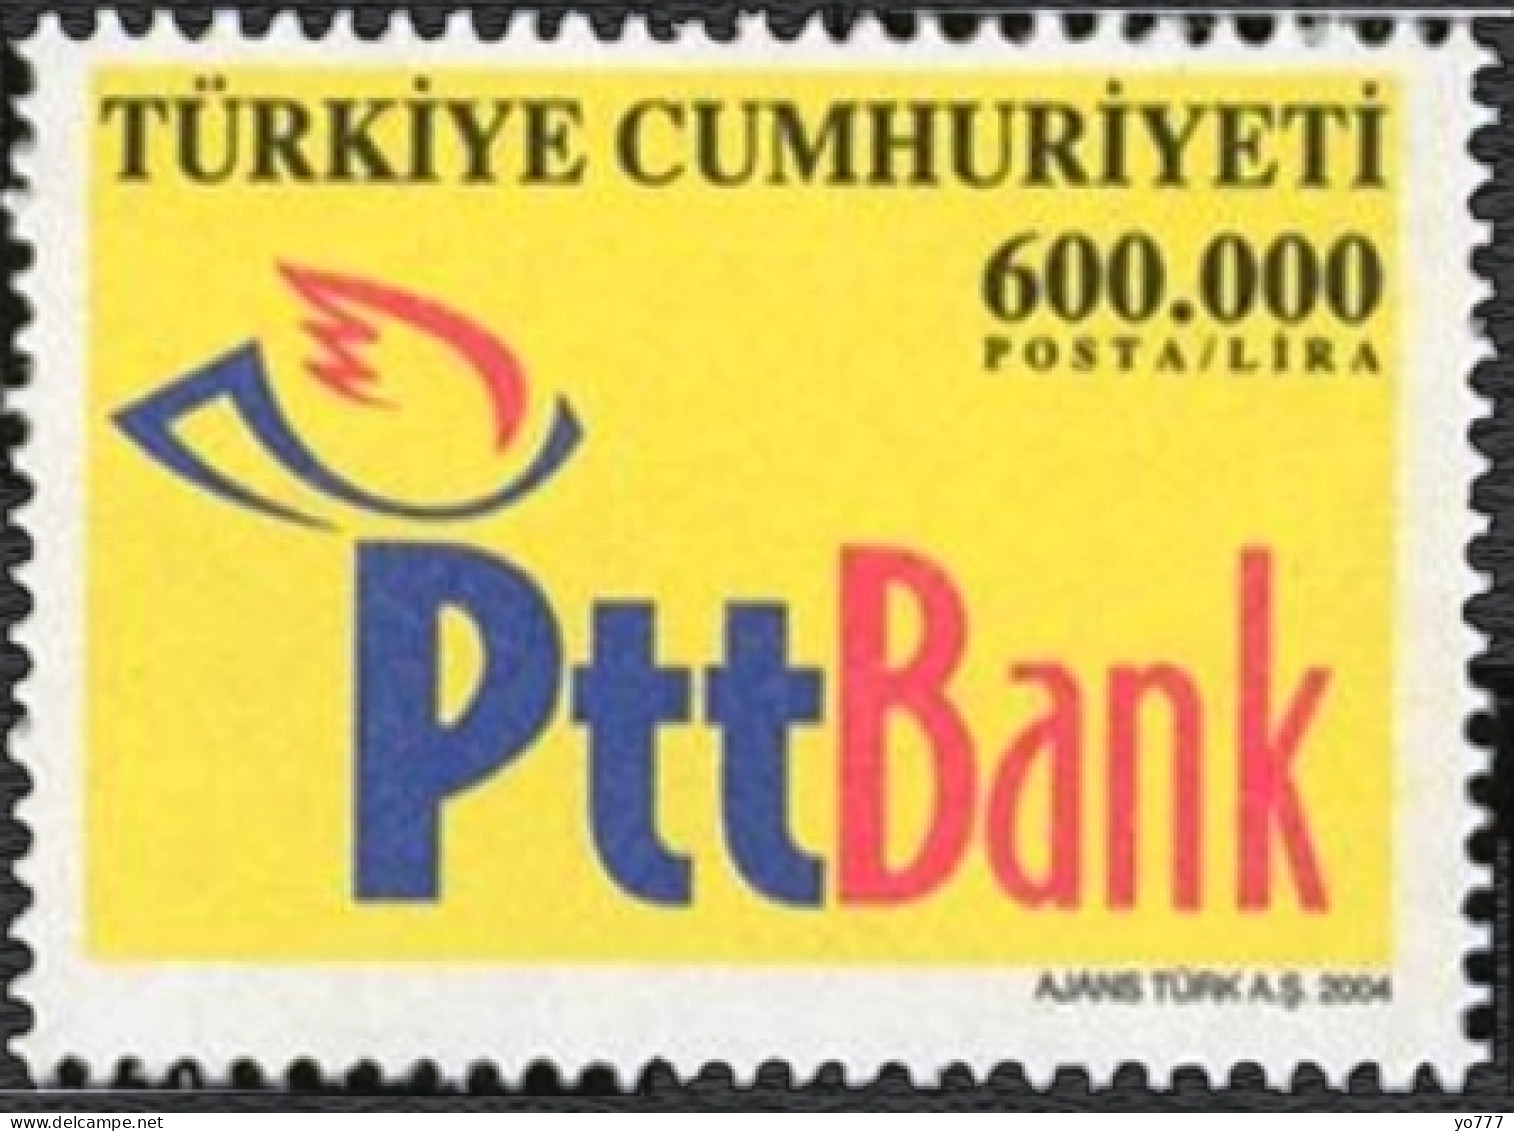 (3369) TURKEY REGULAR ISSUE STAMPS WITH THE THEME OF PTT BANK MNH** - Unused Stamps